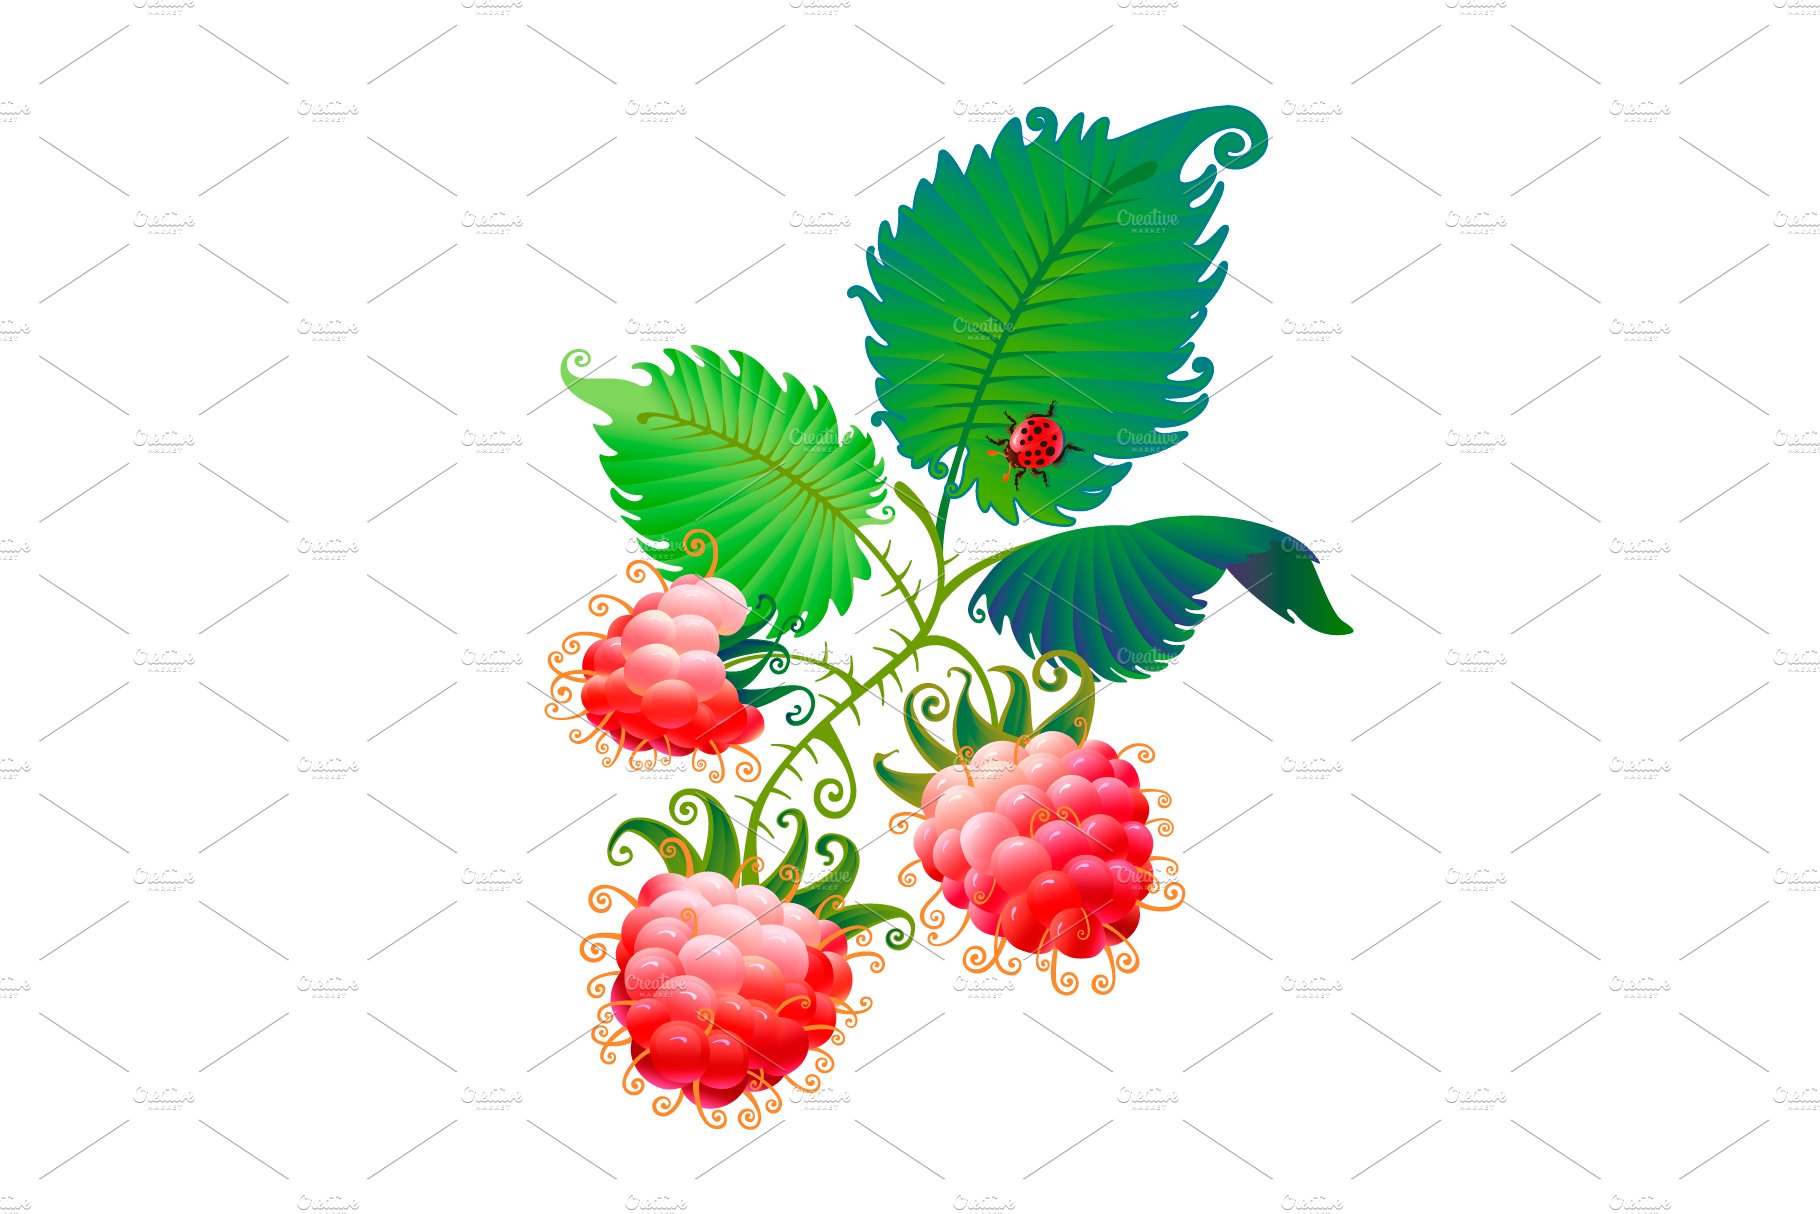 Raspberry. Art and patterns preview image.